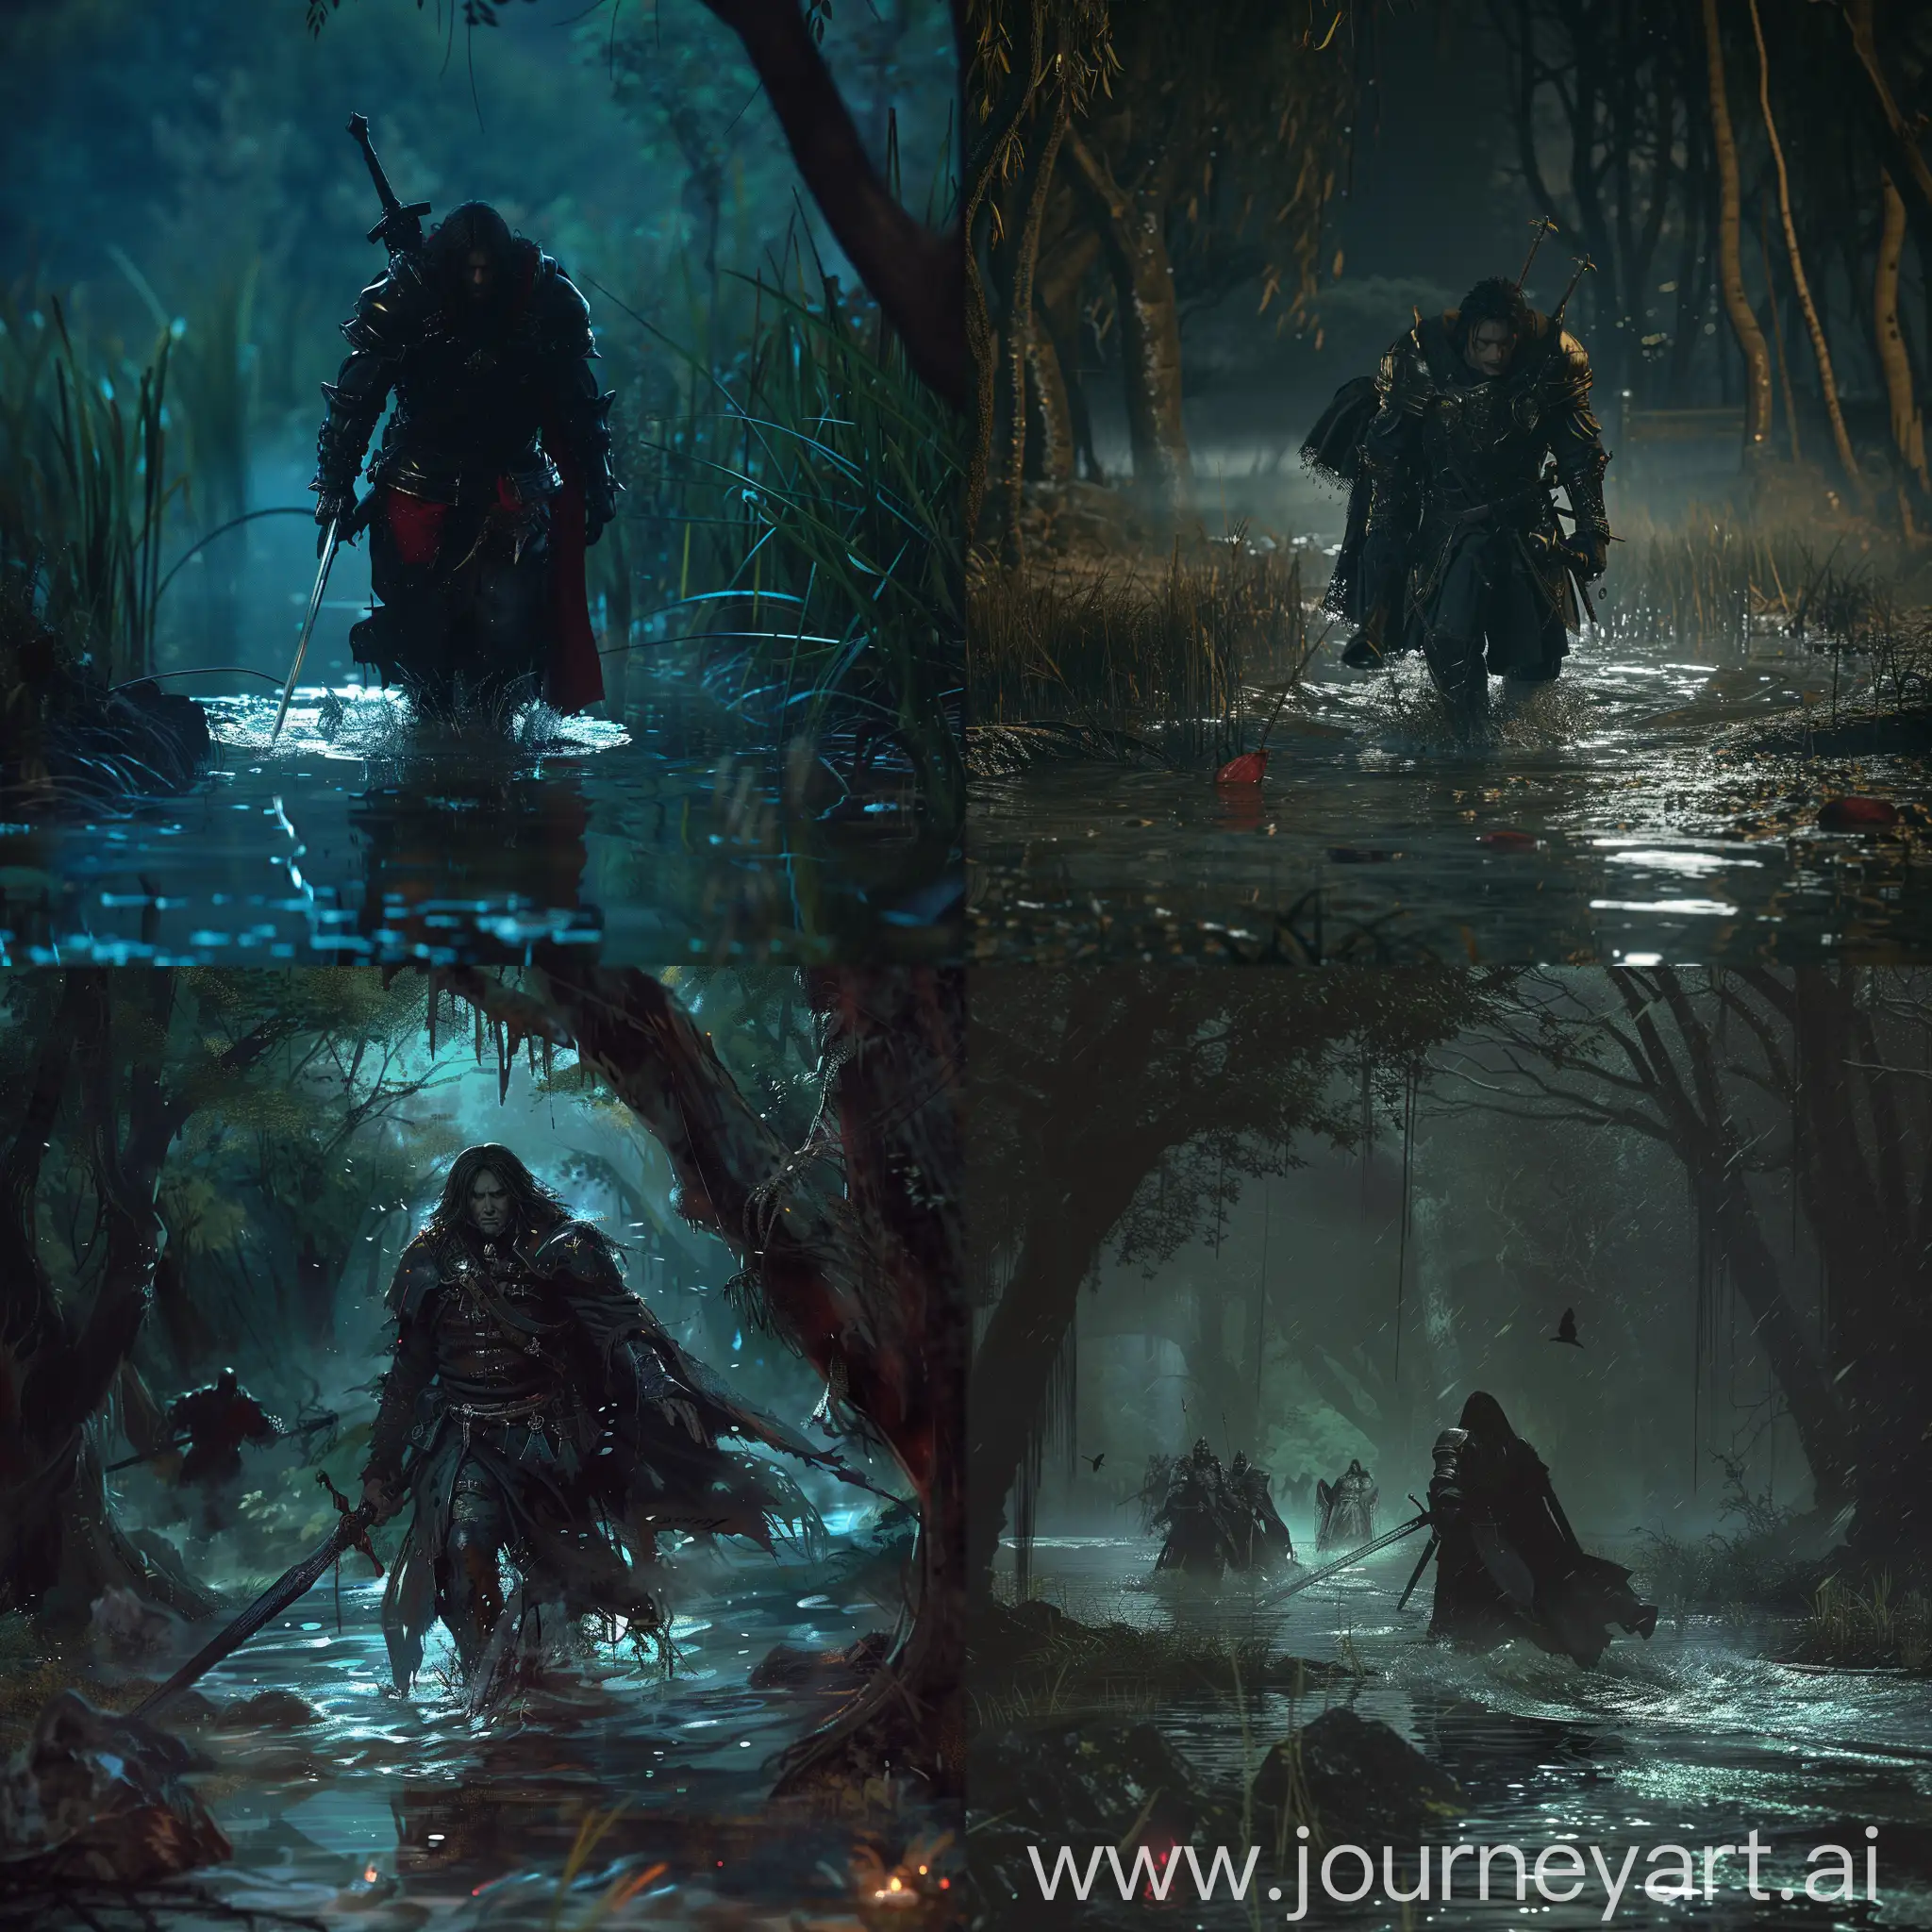 Legion from castlevania, emerging from a watery swamp. Night time. Dim light.